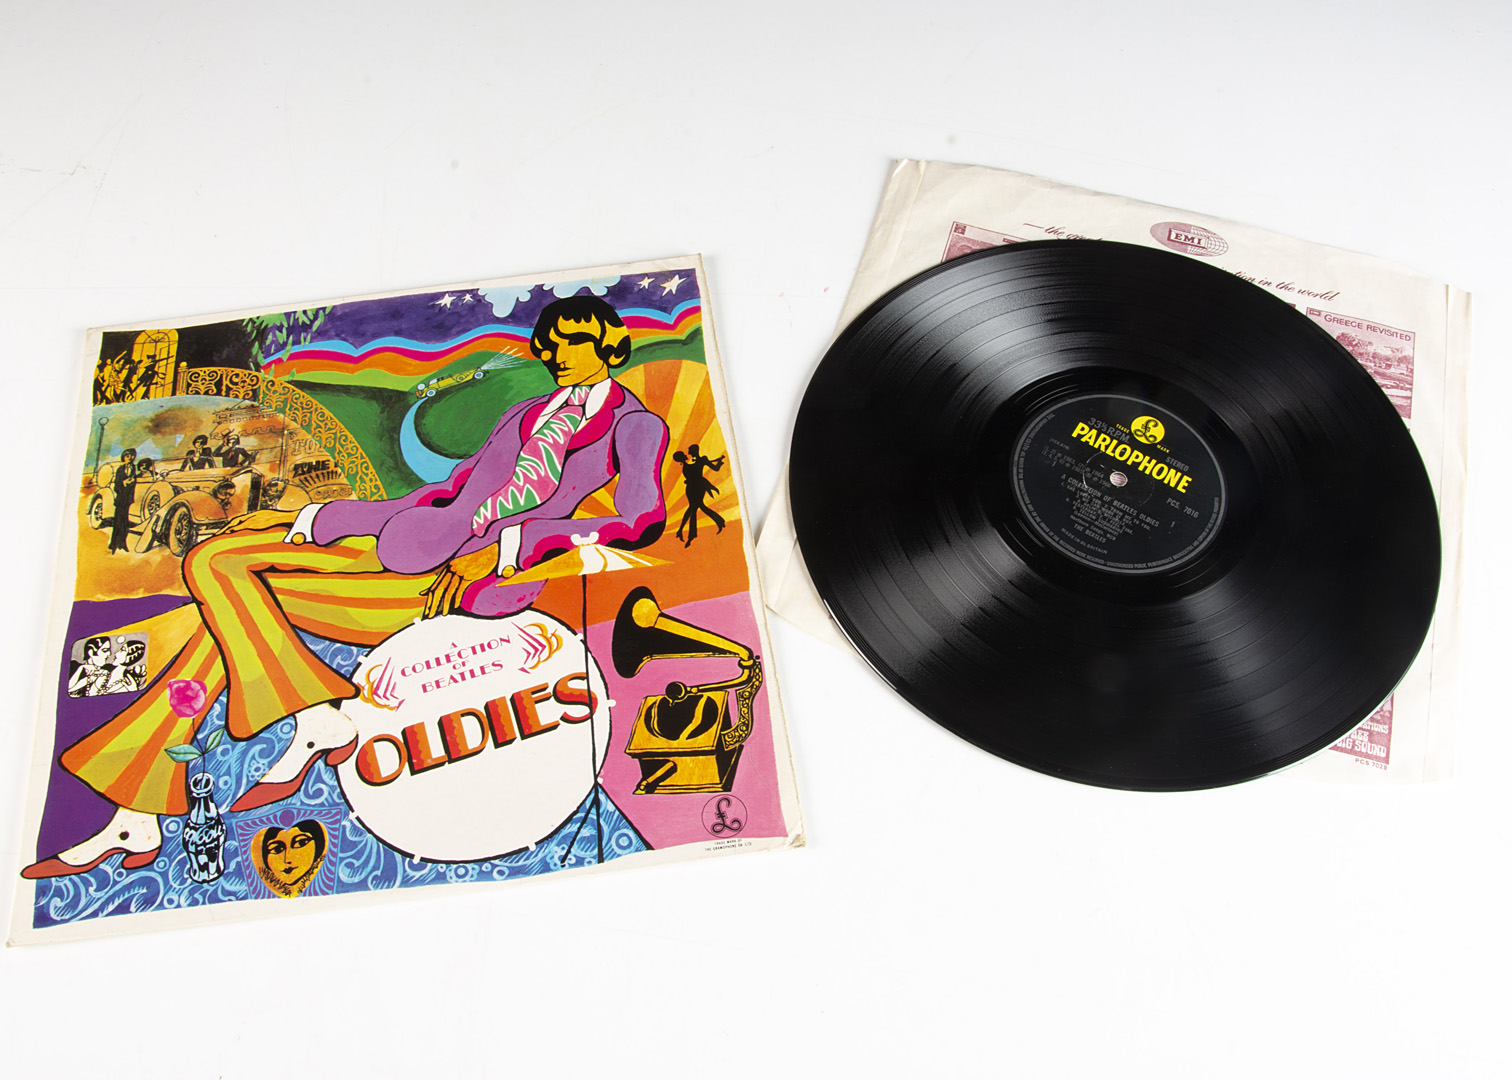 The Beatles LP, A Collection of Beatles Oldies - Original UK Stereo release 1966 on Parlophone (